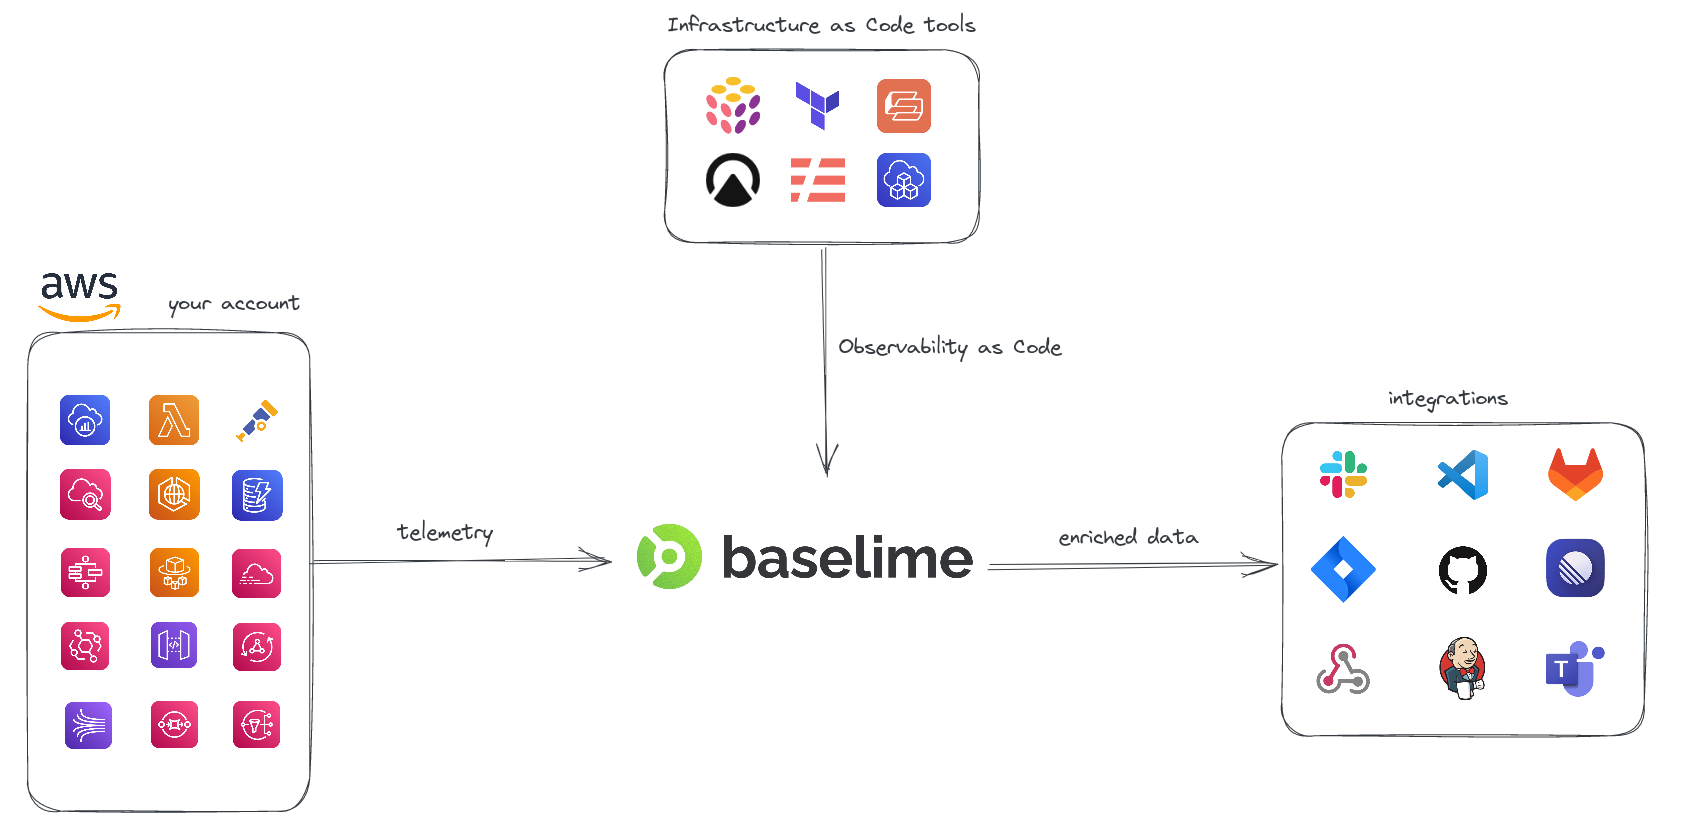 Baselime in your ecosystem